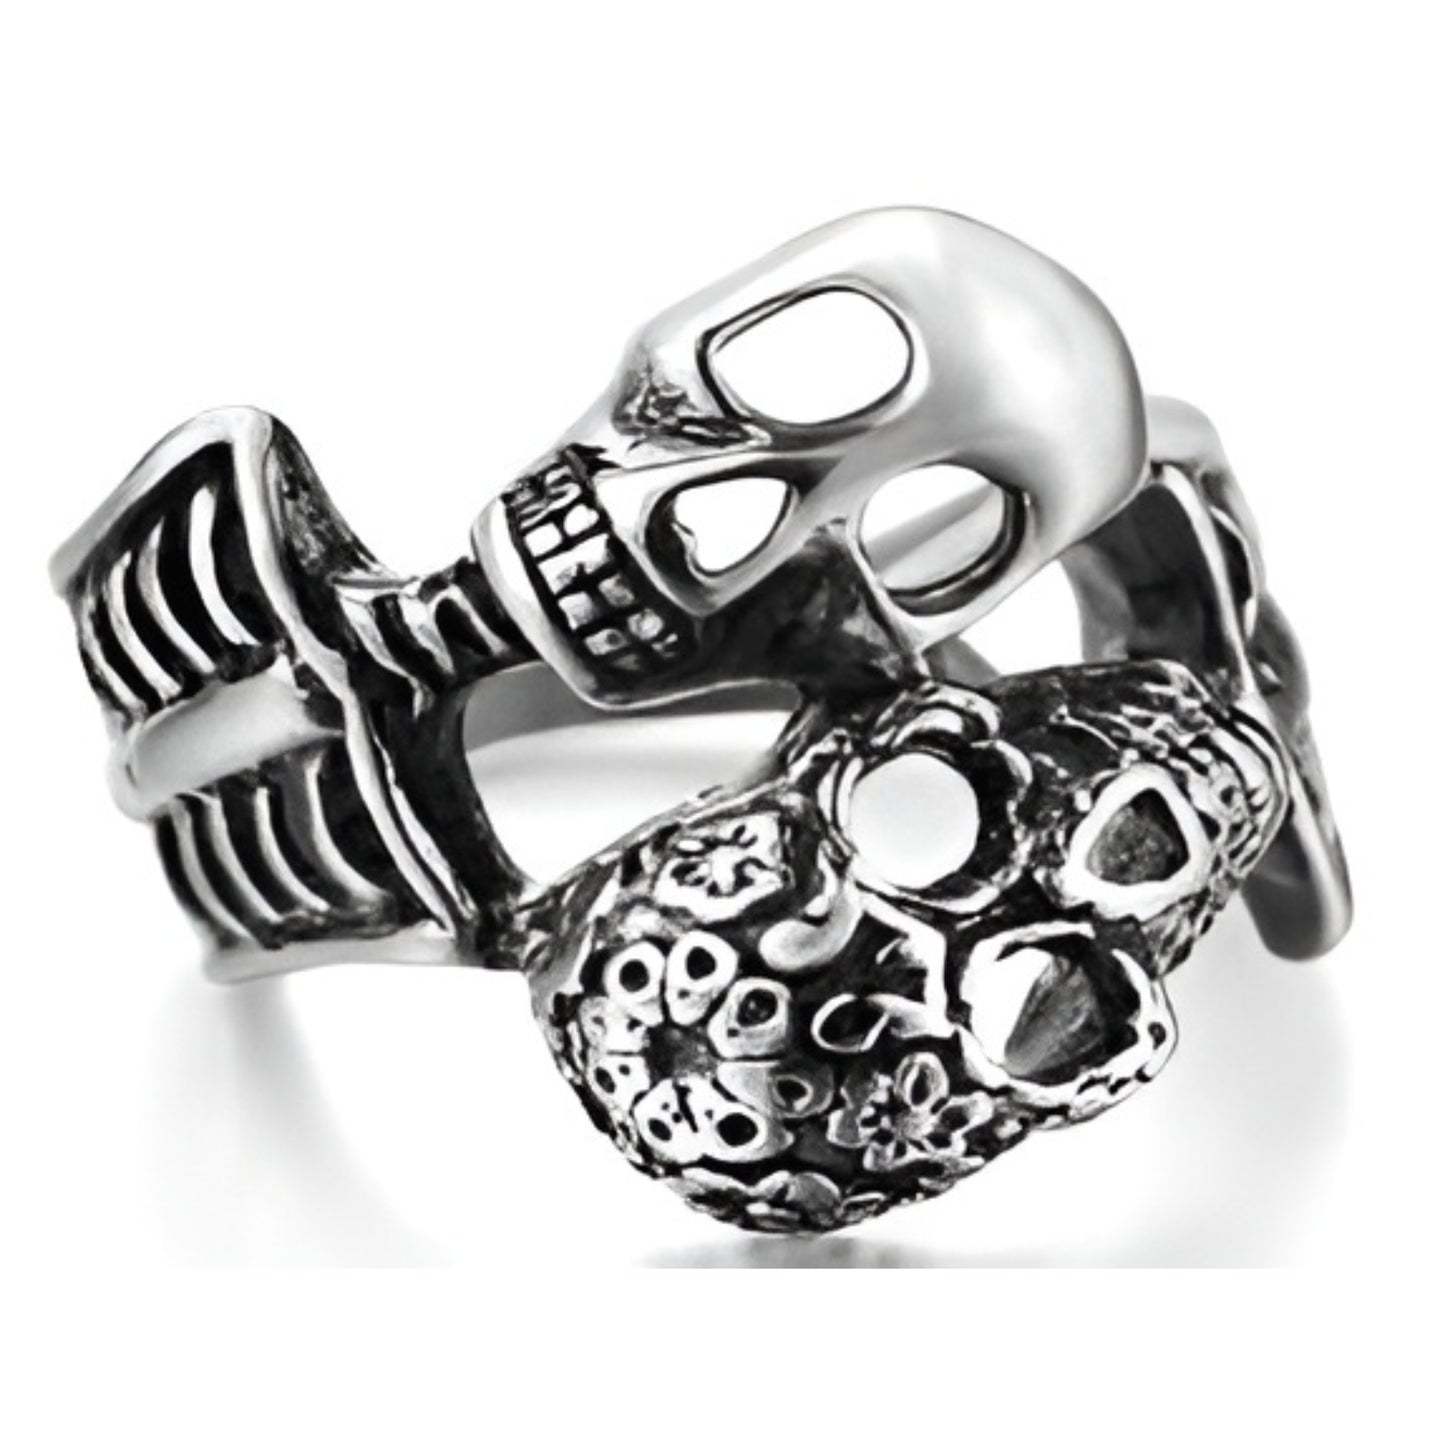 R126 Stainless Steel His And Her Skull Biker Ring